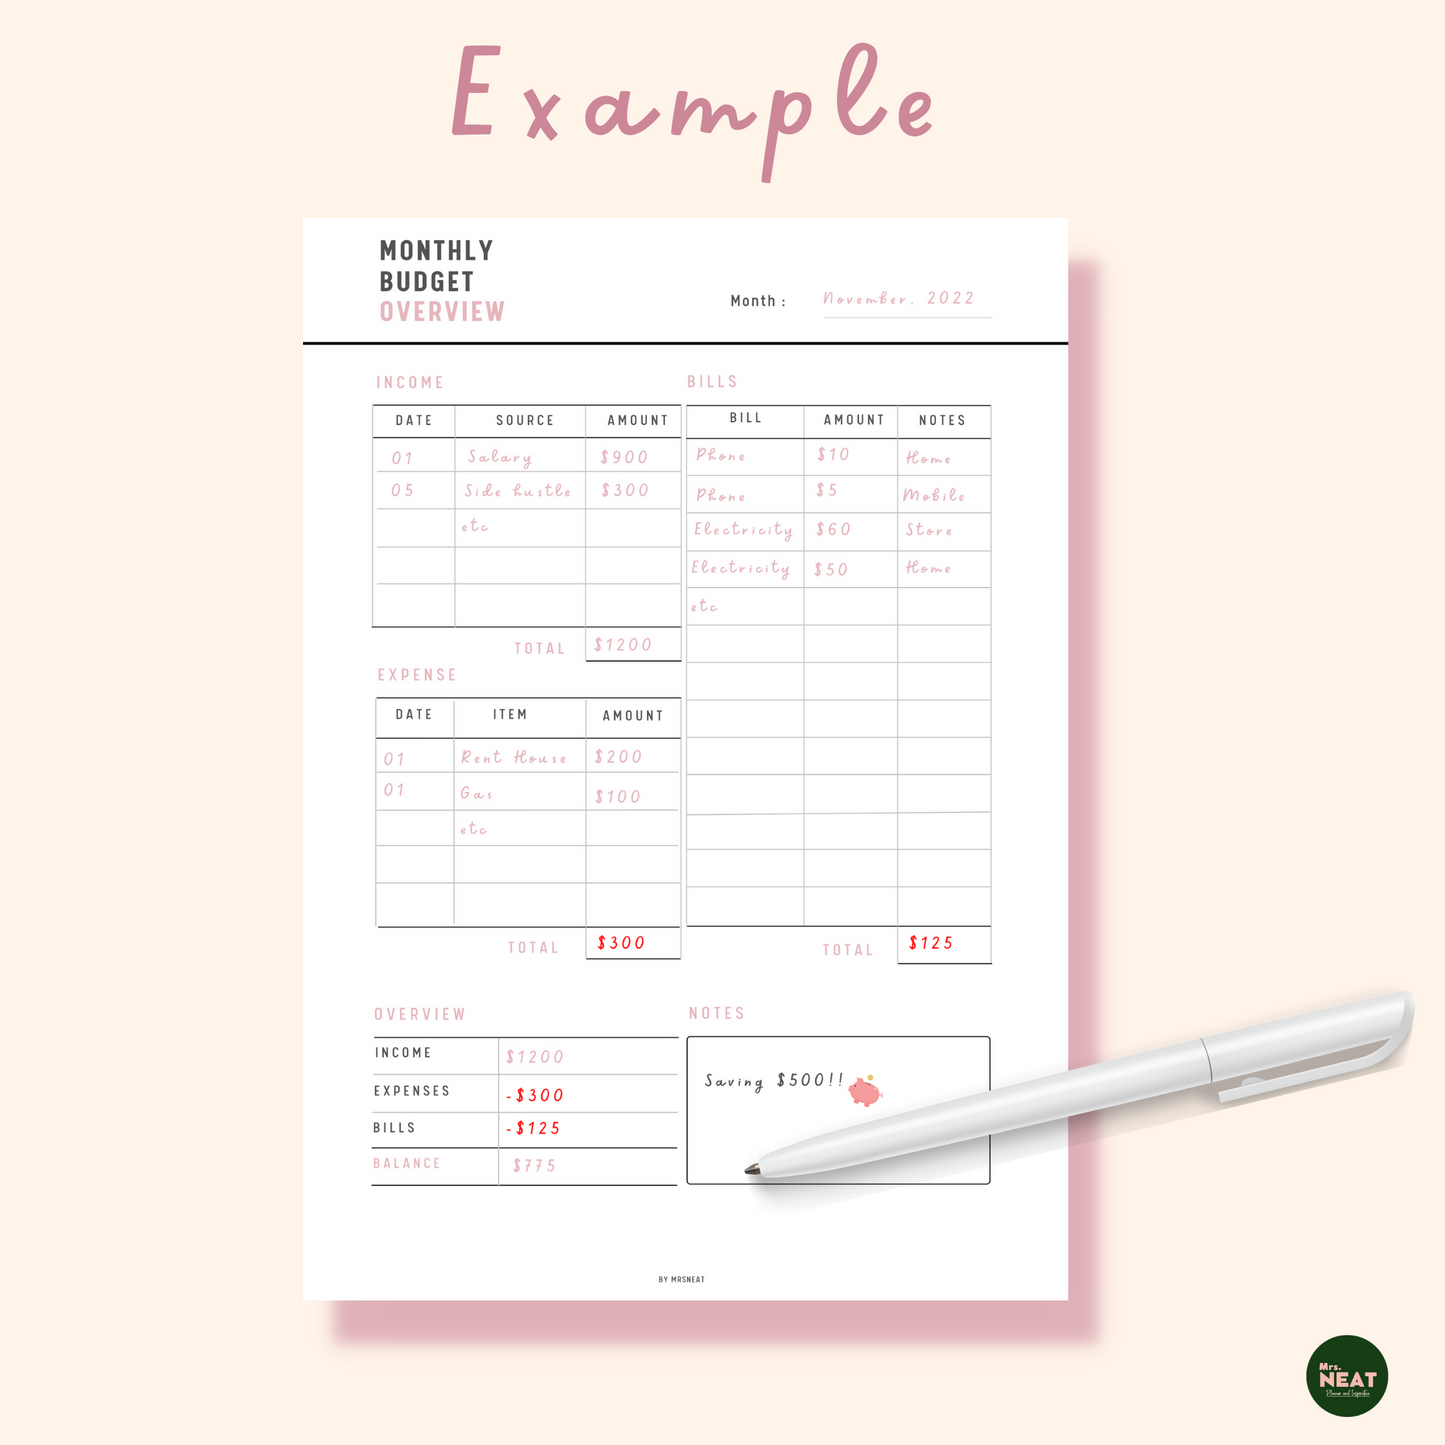 Black Pink Monthly Budget Overview with list of income, expense, bills, overview and notes